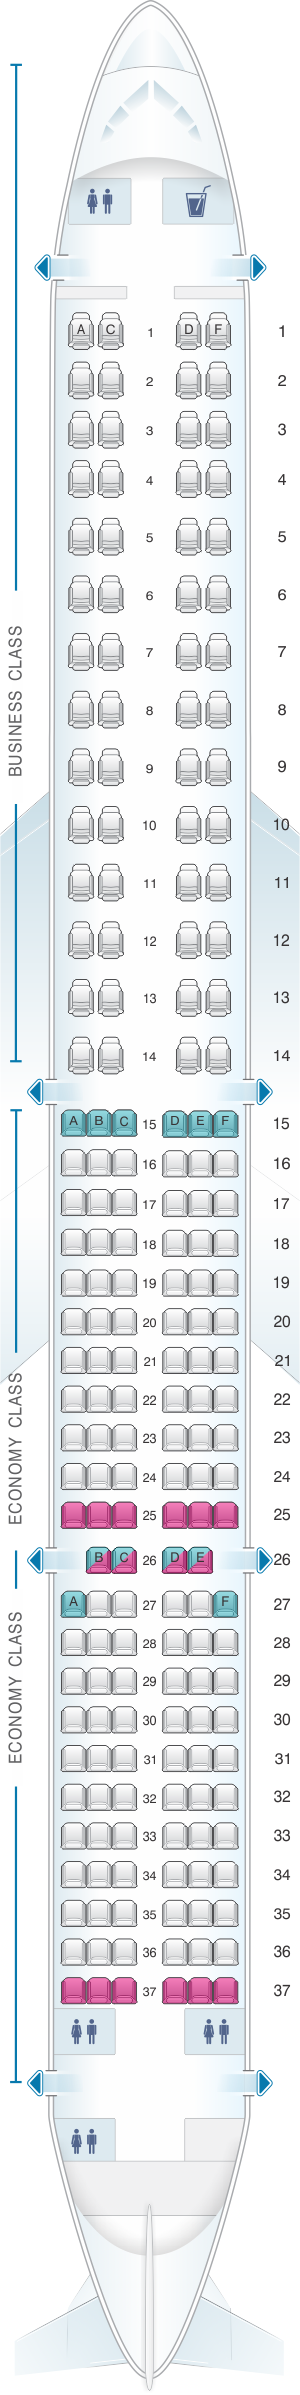 Airbus A Seating Chart United Two Birds Home